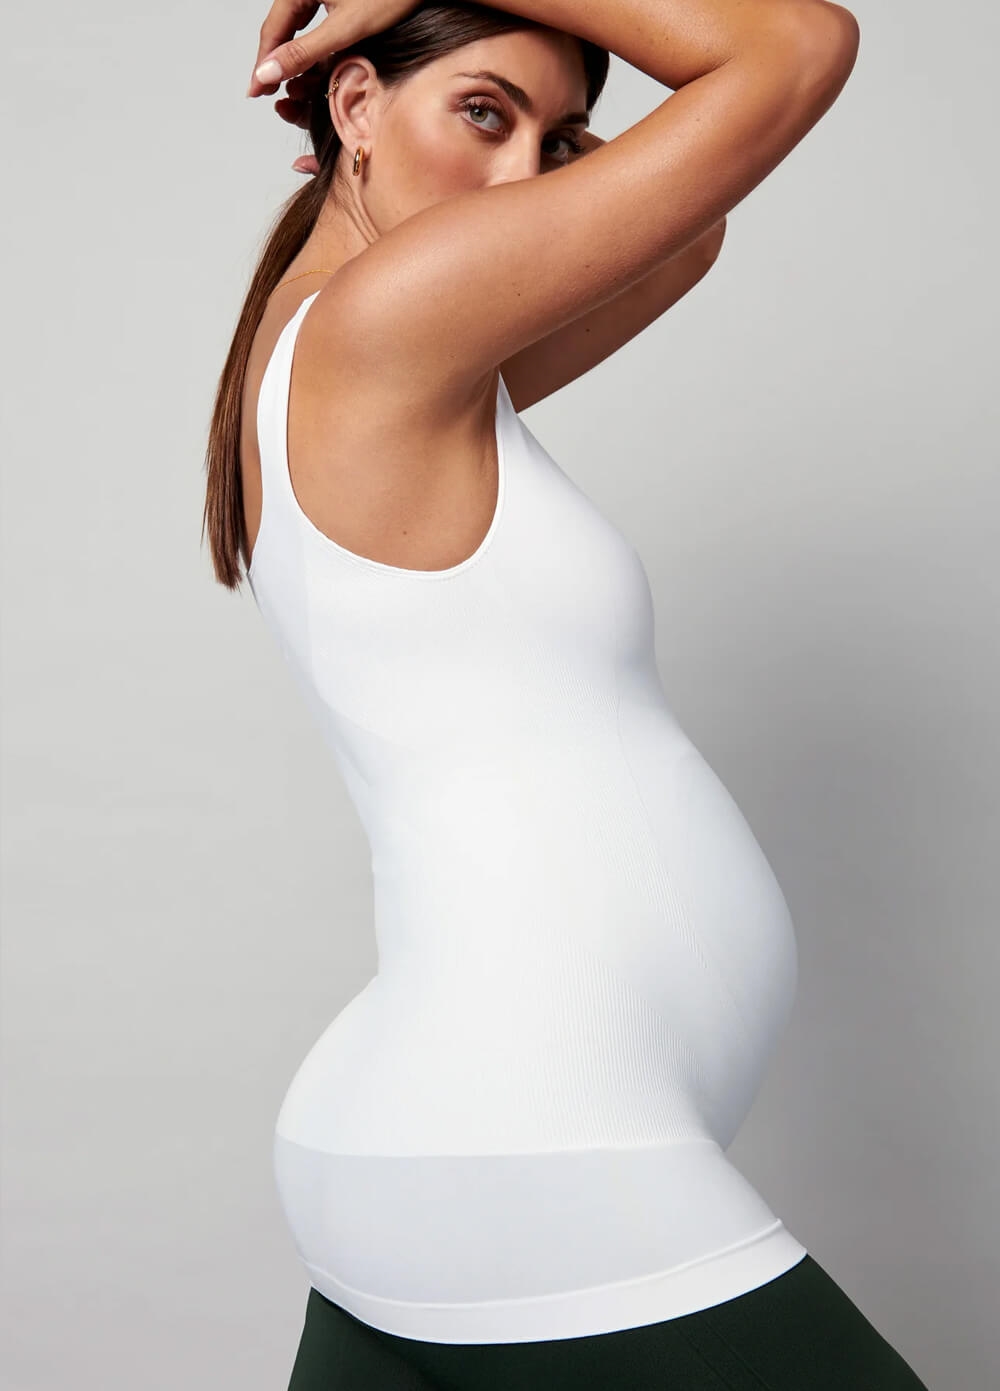 BodyStyler Maternity Belly Support Tank Top in White by Blanqi